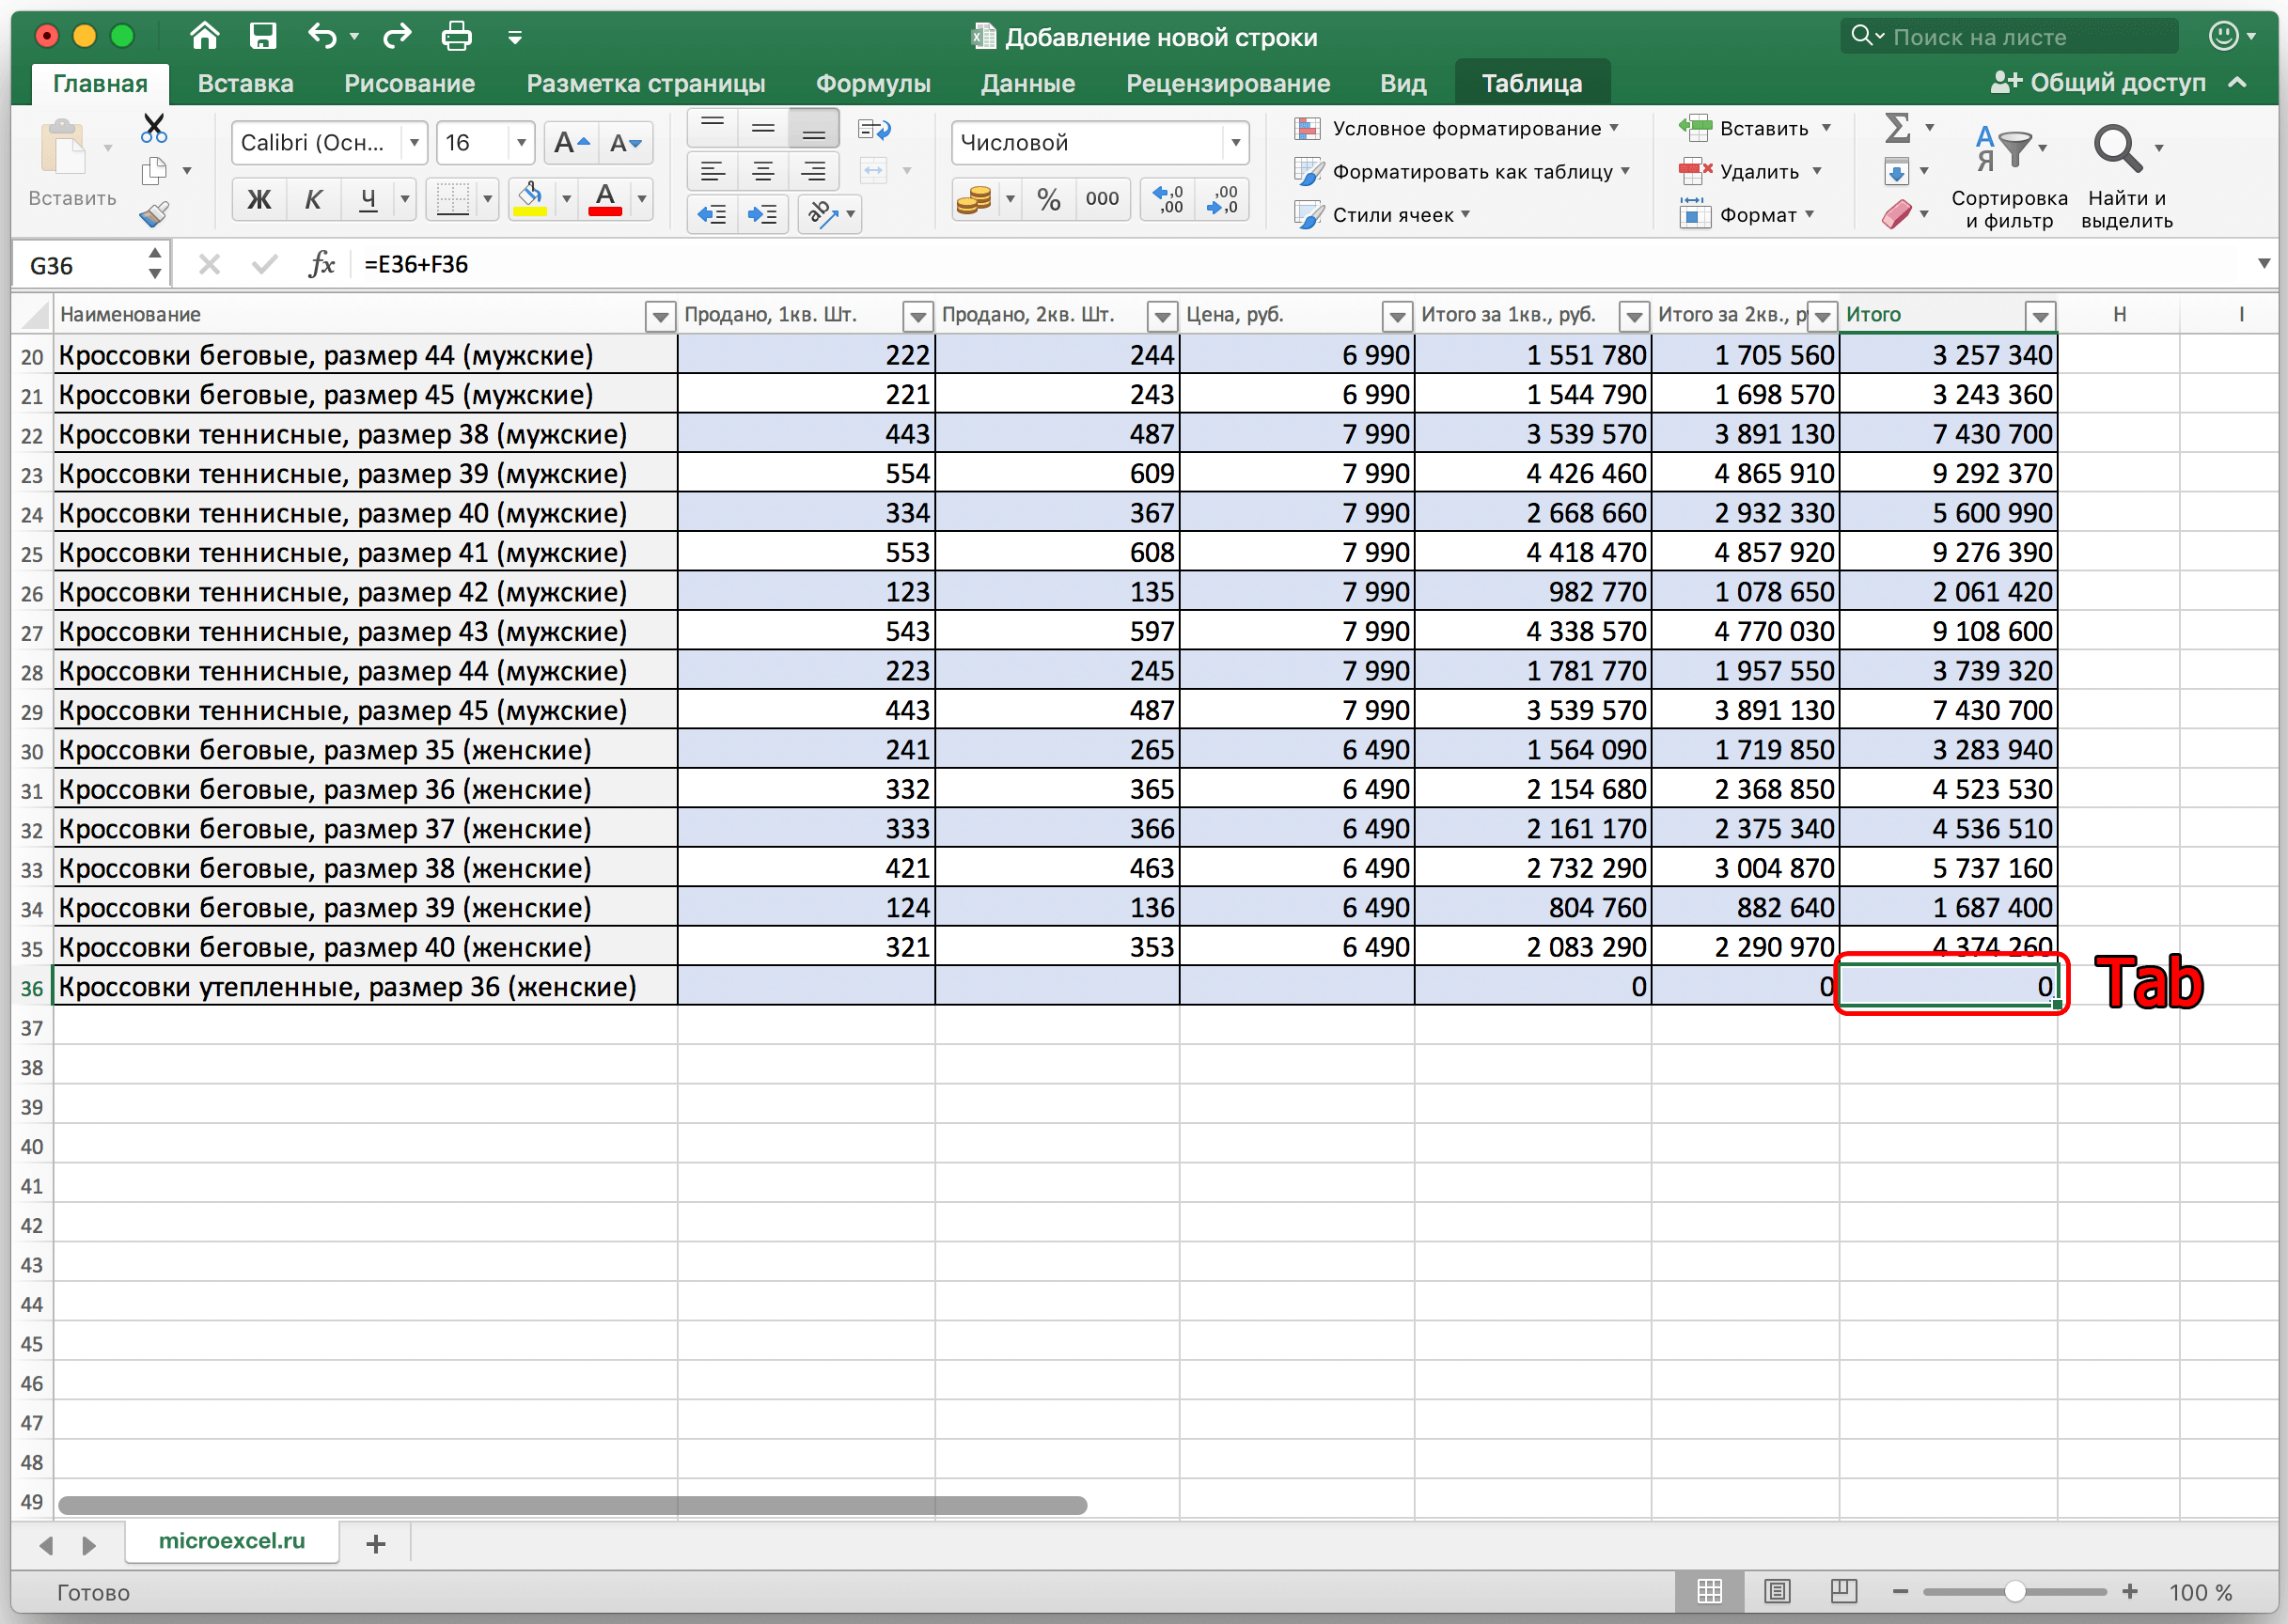 How to add a new row in excel. Inside and at the end of the table, in the smart table